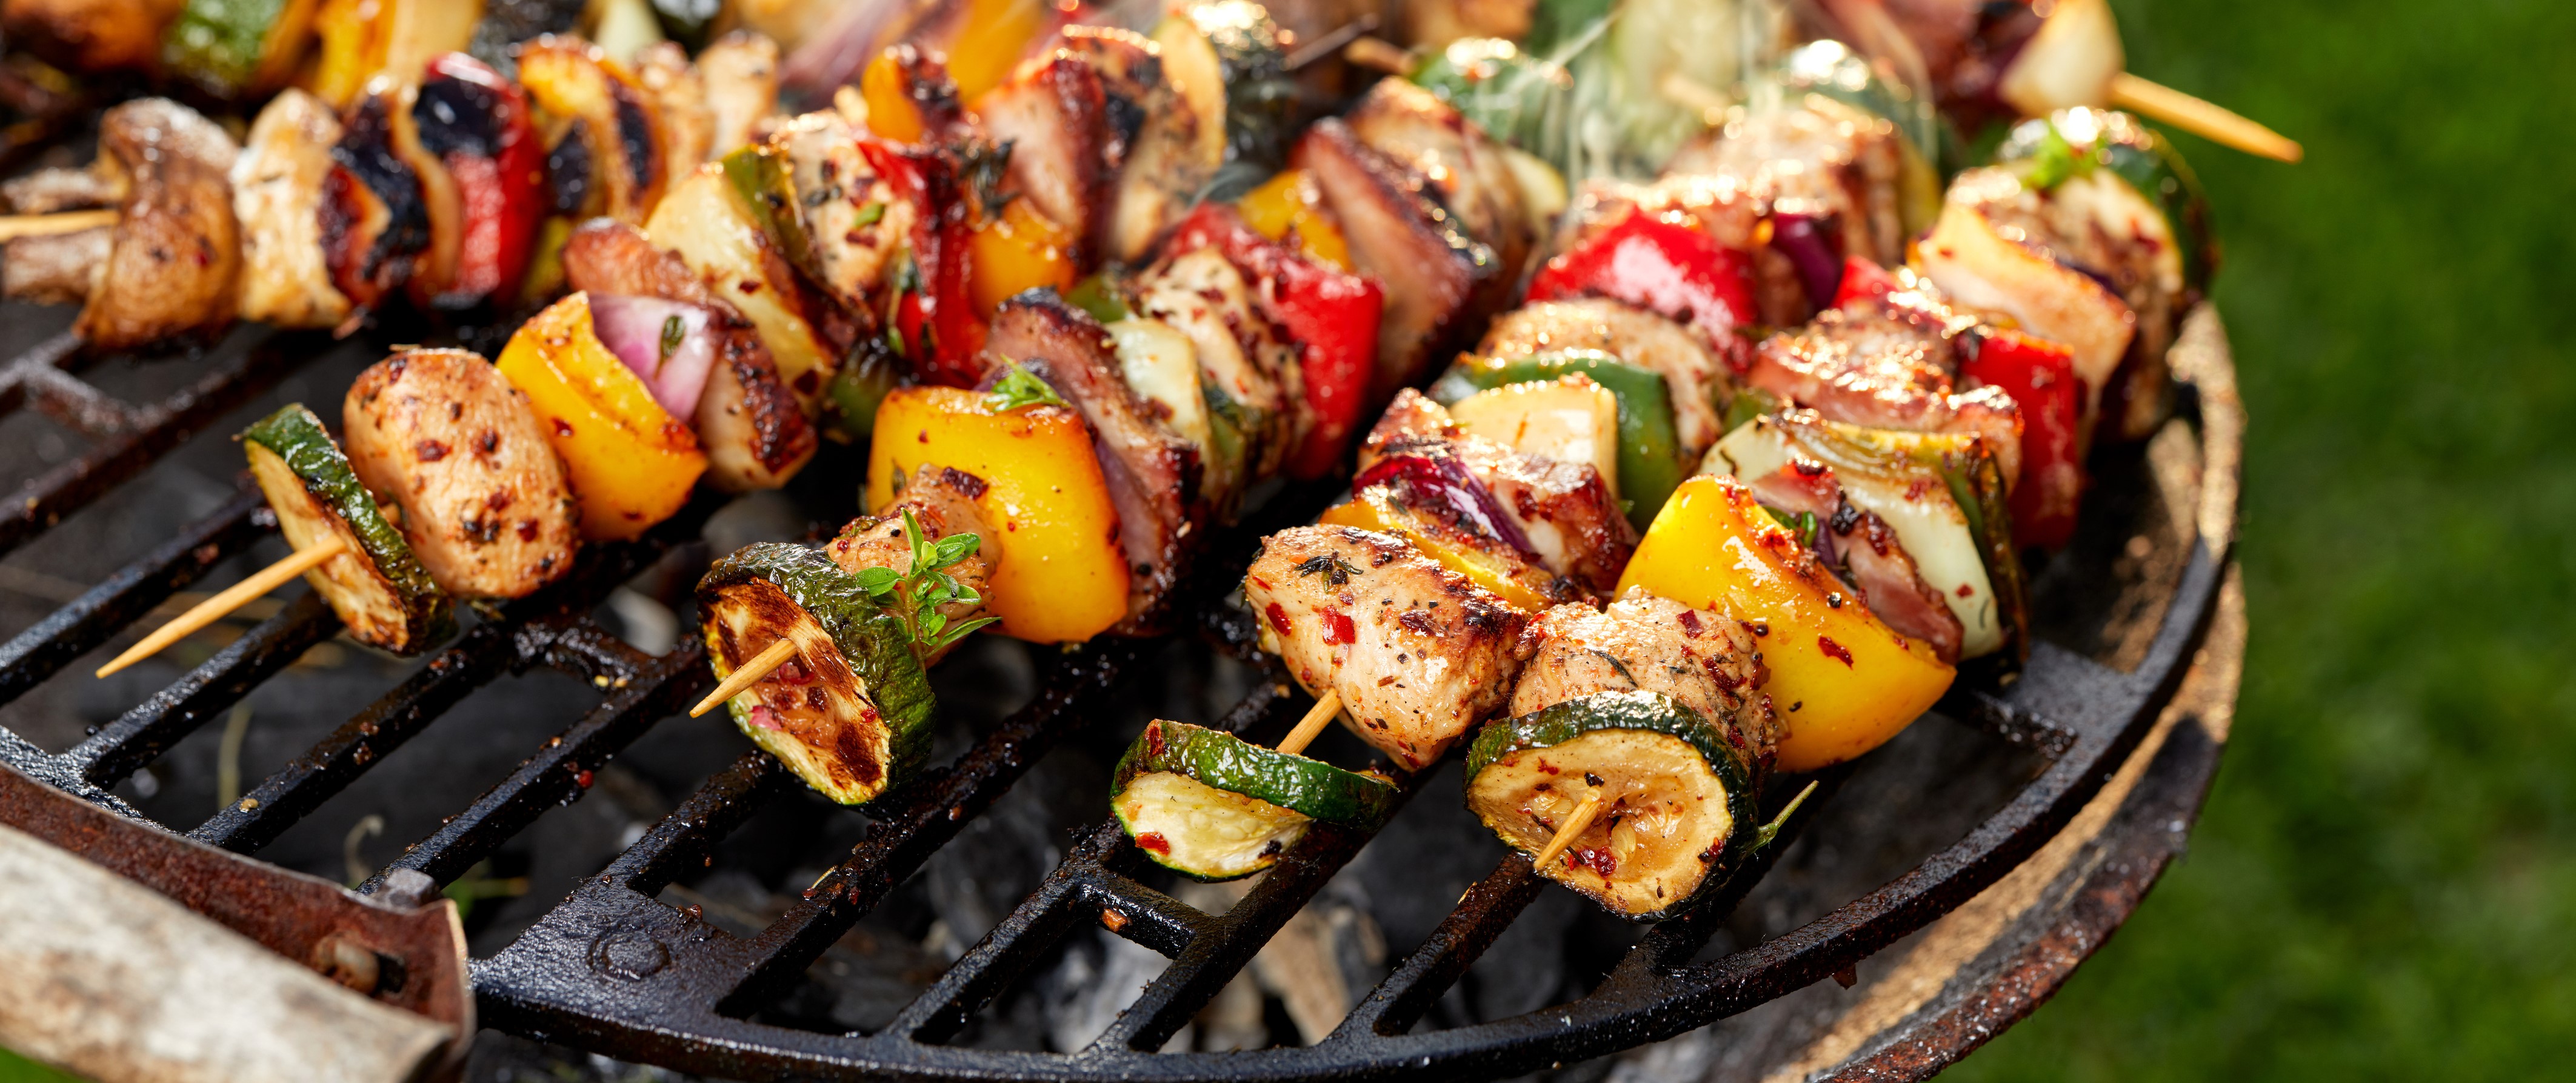 Grilled skewers on a grilled plate